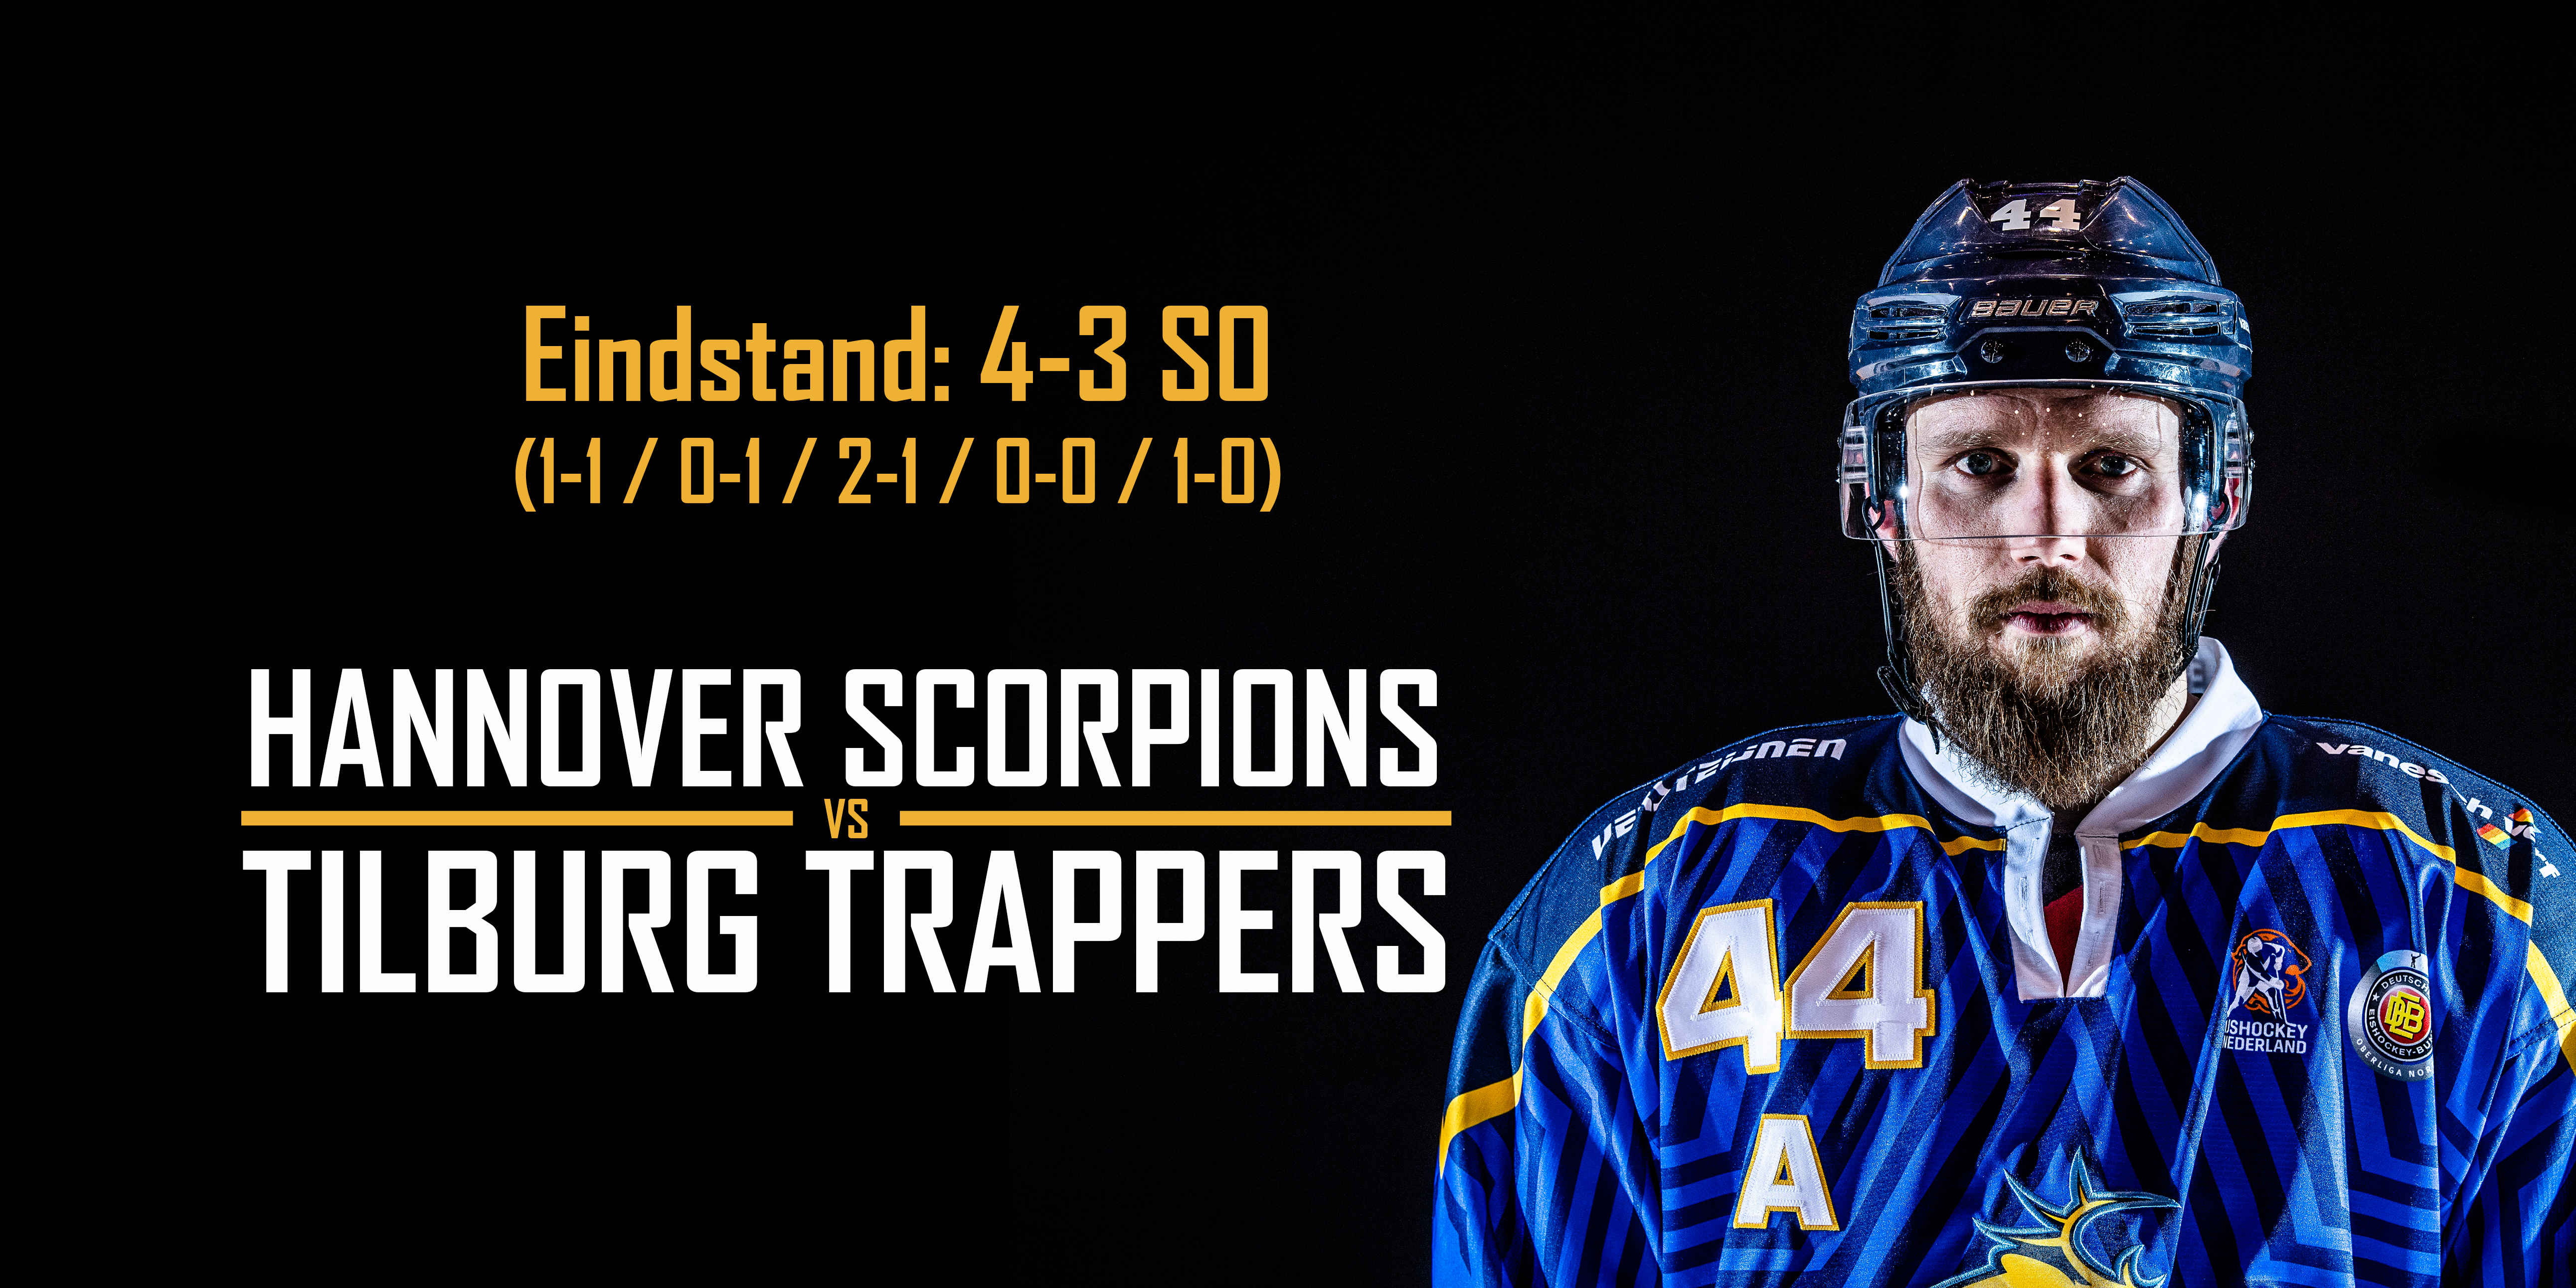 Hannover Scorpions vs. Tilburg Trappers (4-3 SO)